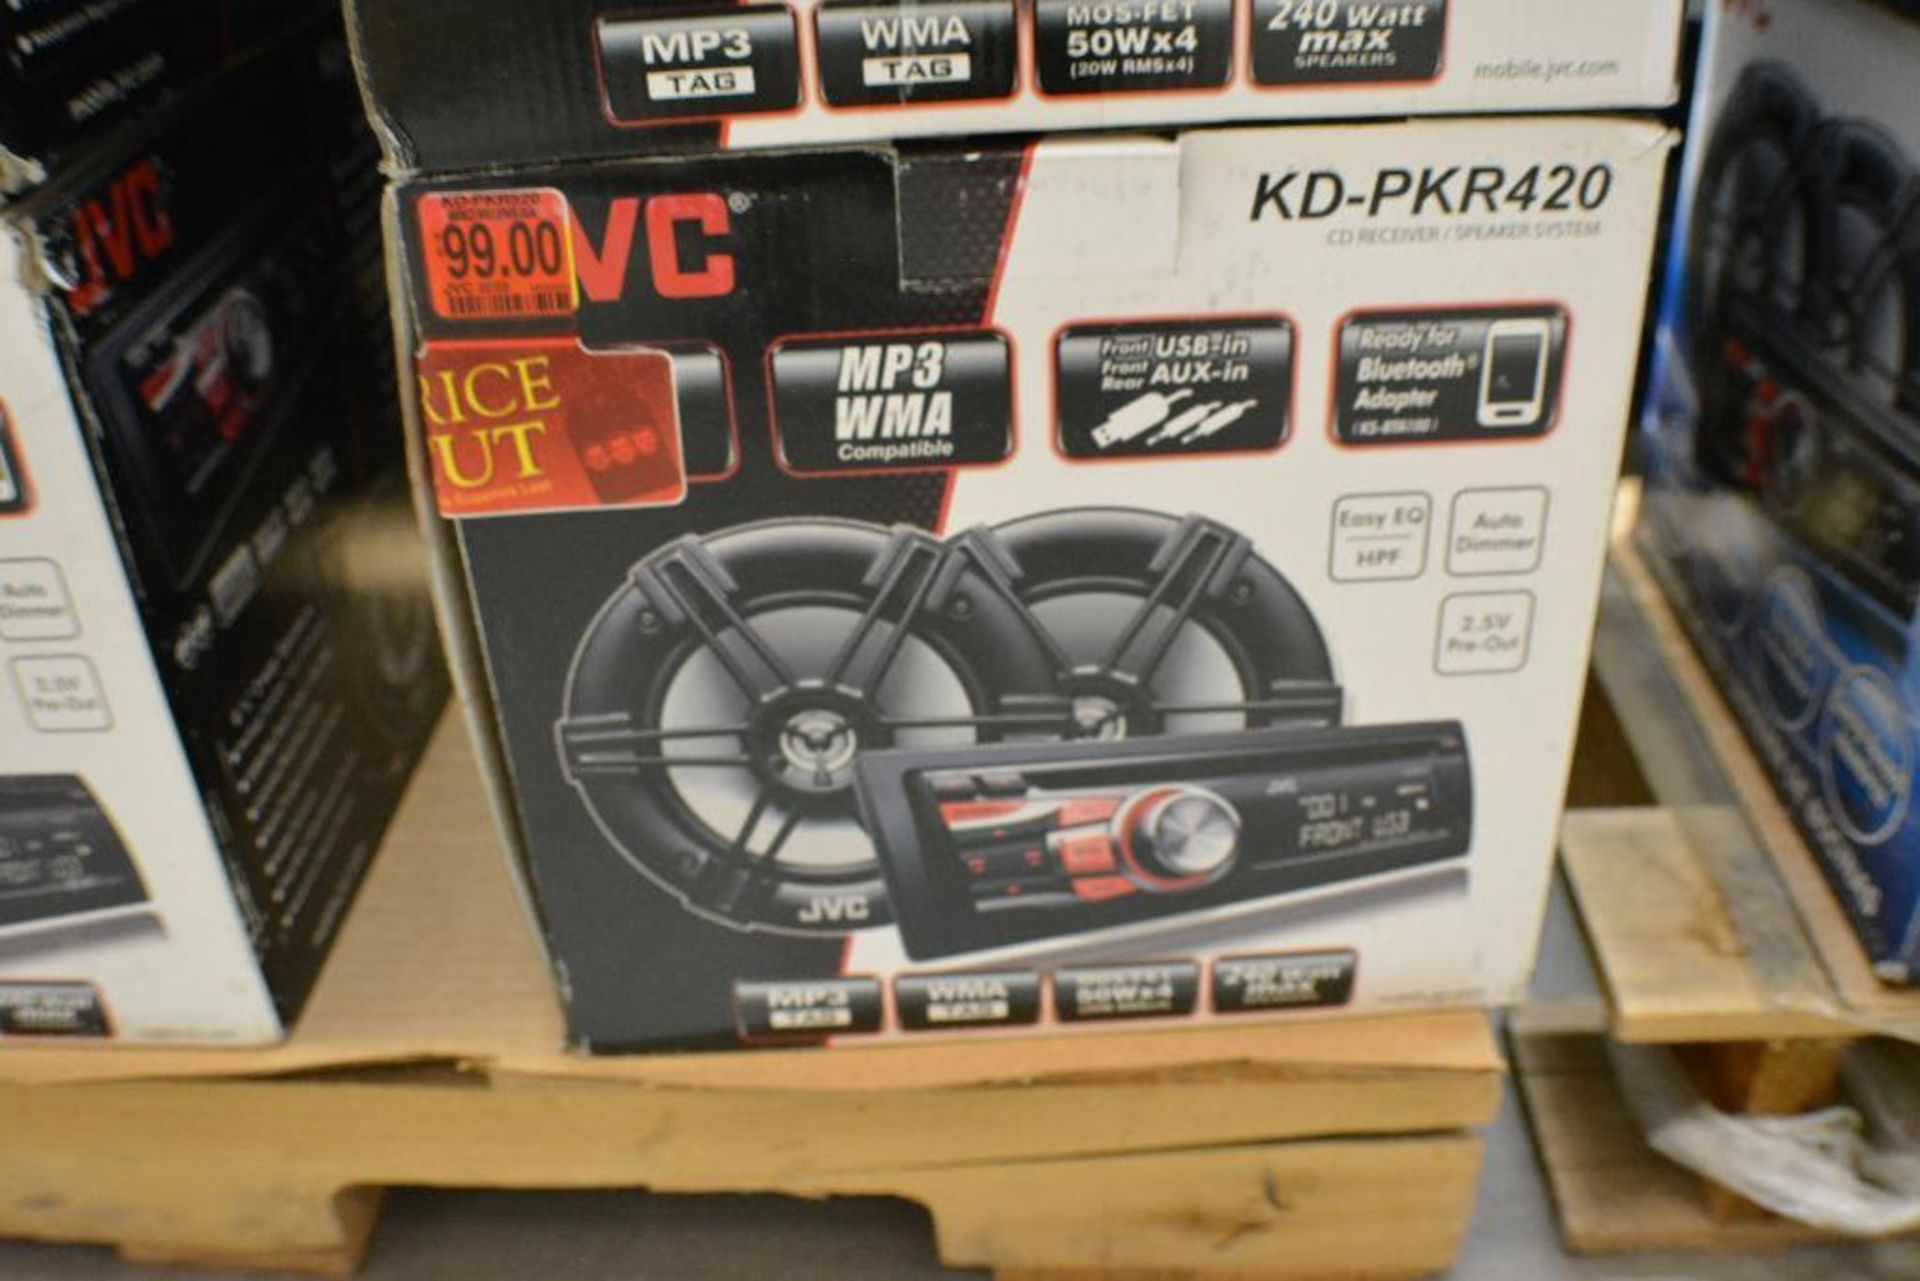 JVC Car Stereo Model KD-PKR420 In-Dash Receiver/Speaker System. MP3 WMA Compatible + Front/Rear USB/ - Image 2 of 5